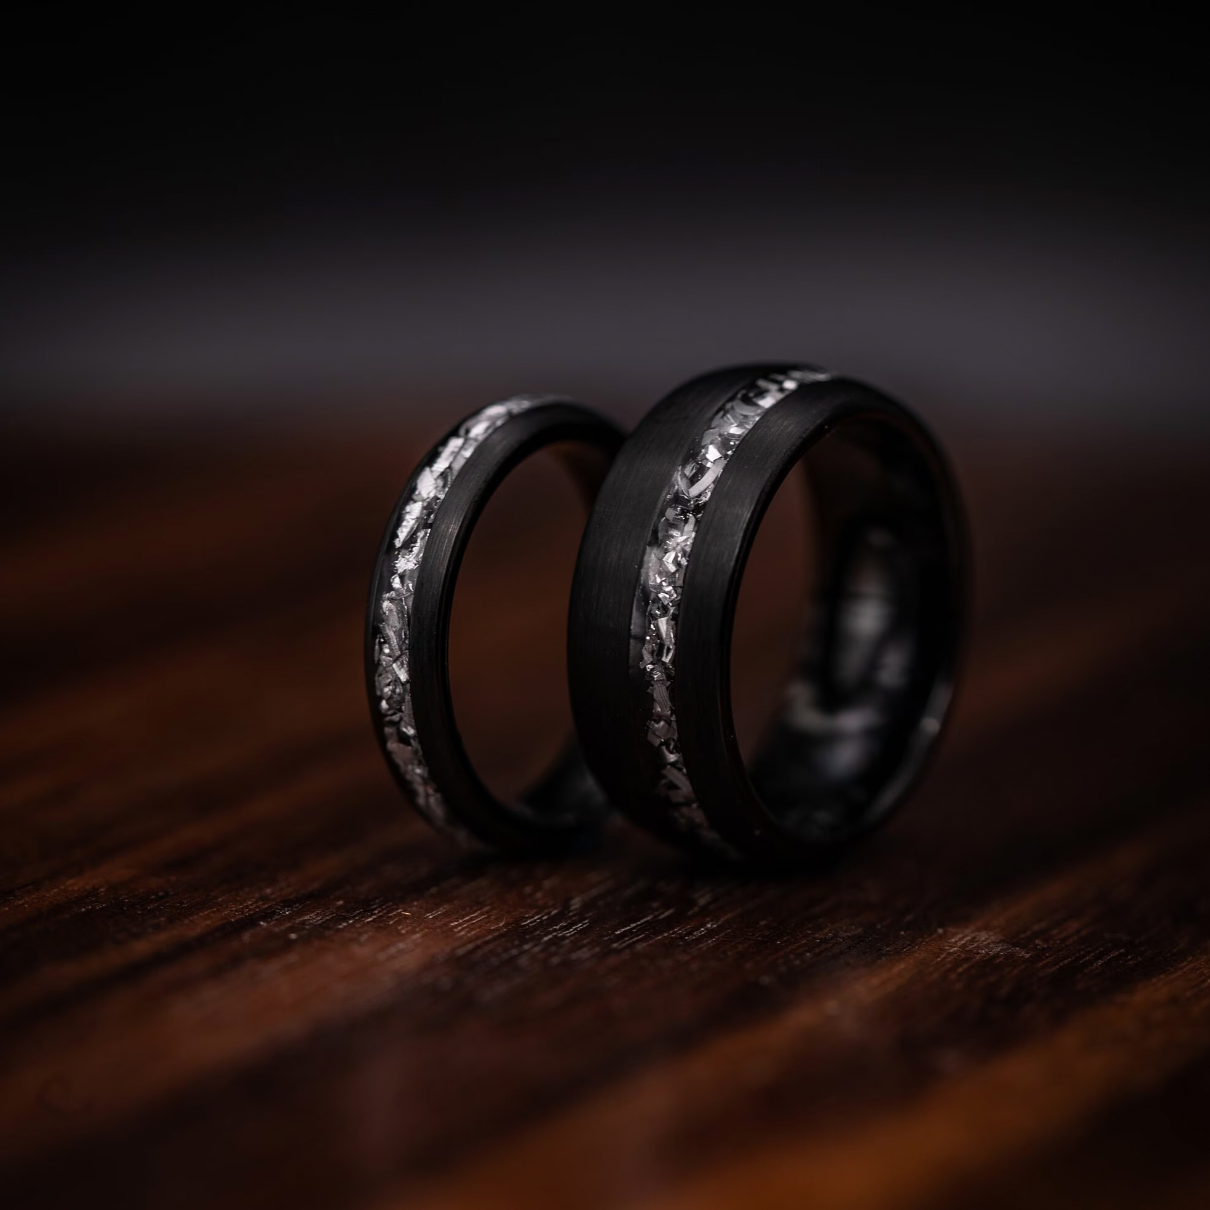 His and hers wedding bands featuring black brushed meteorite